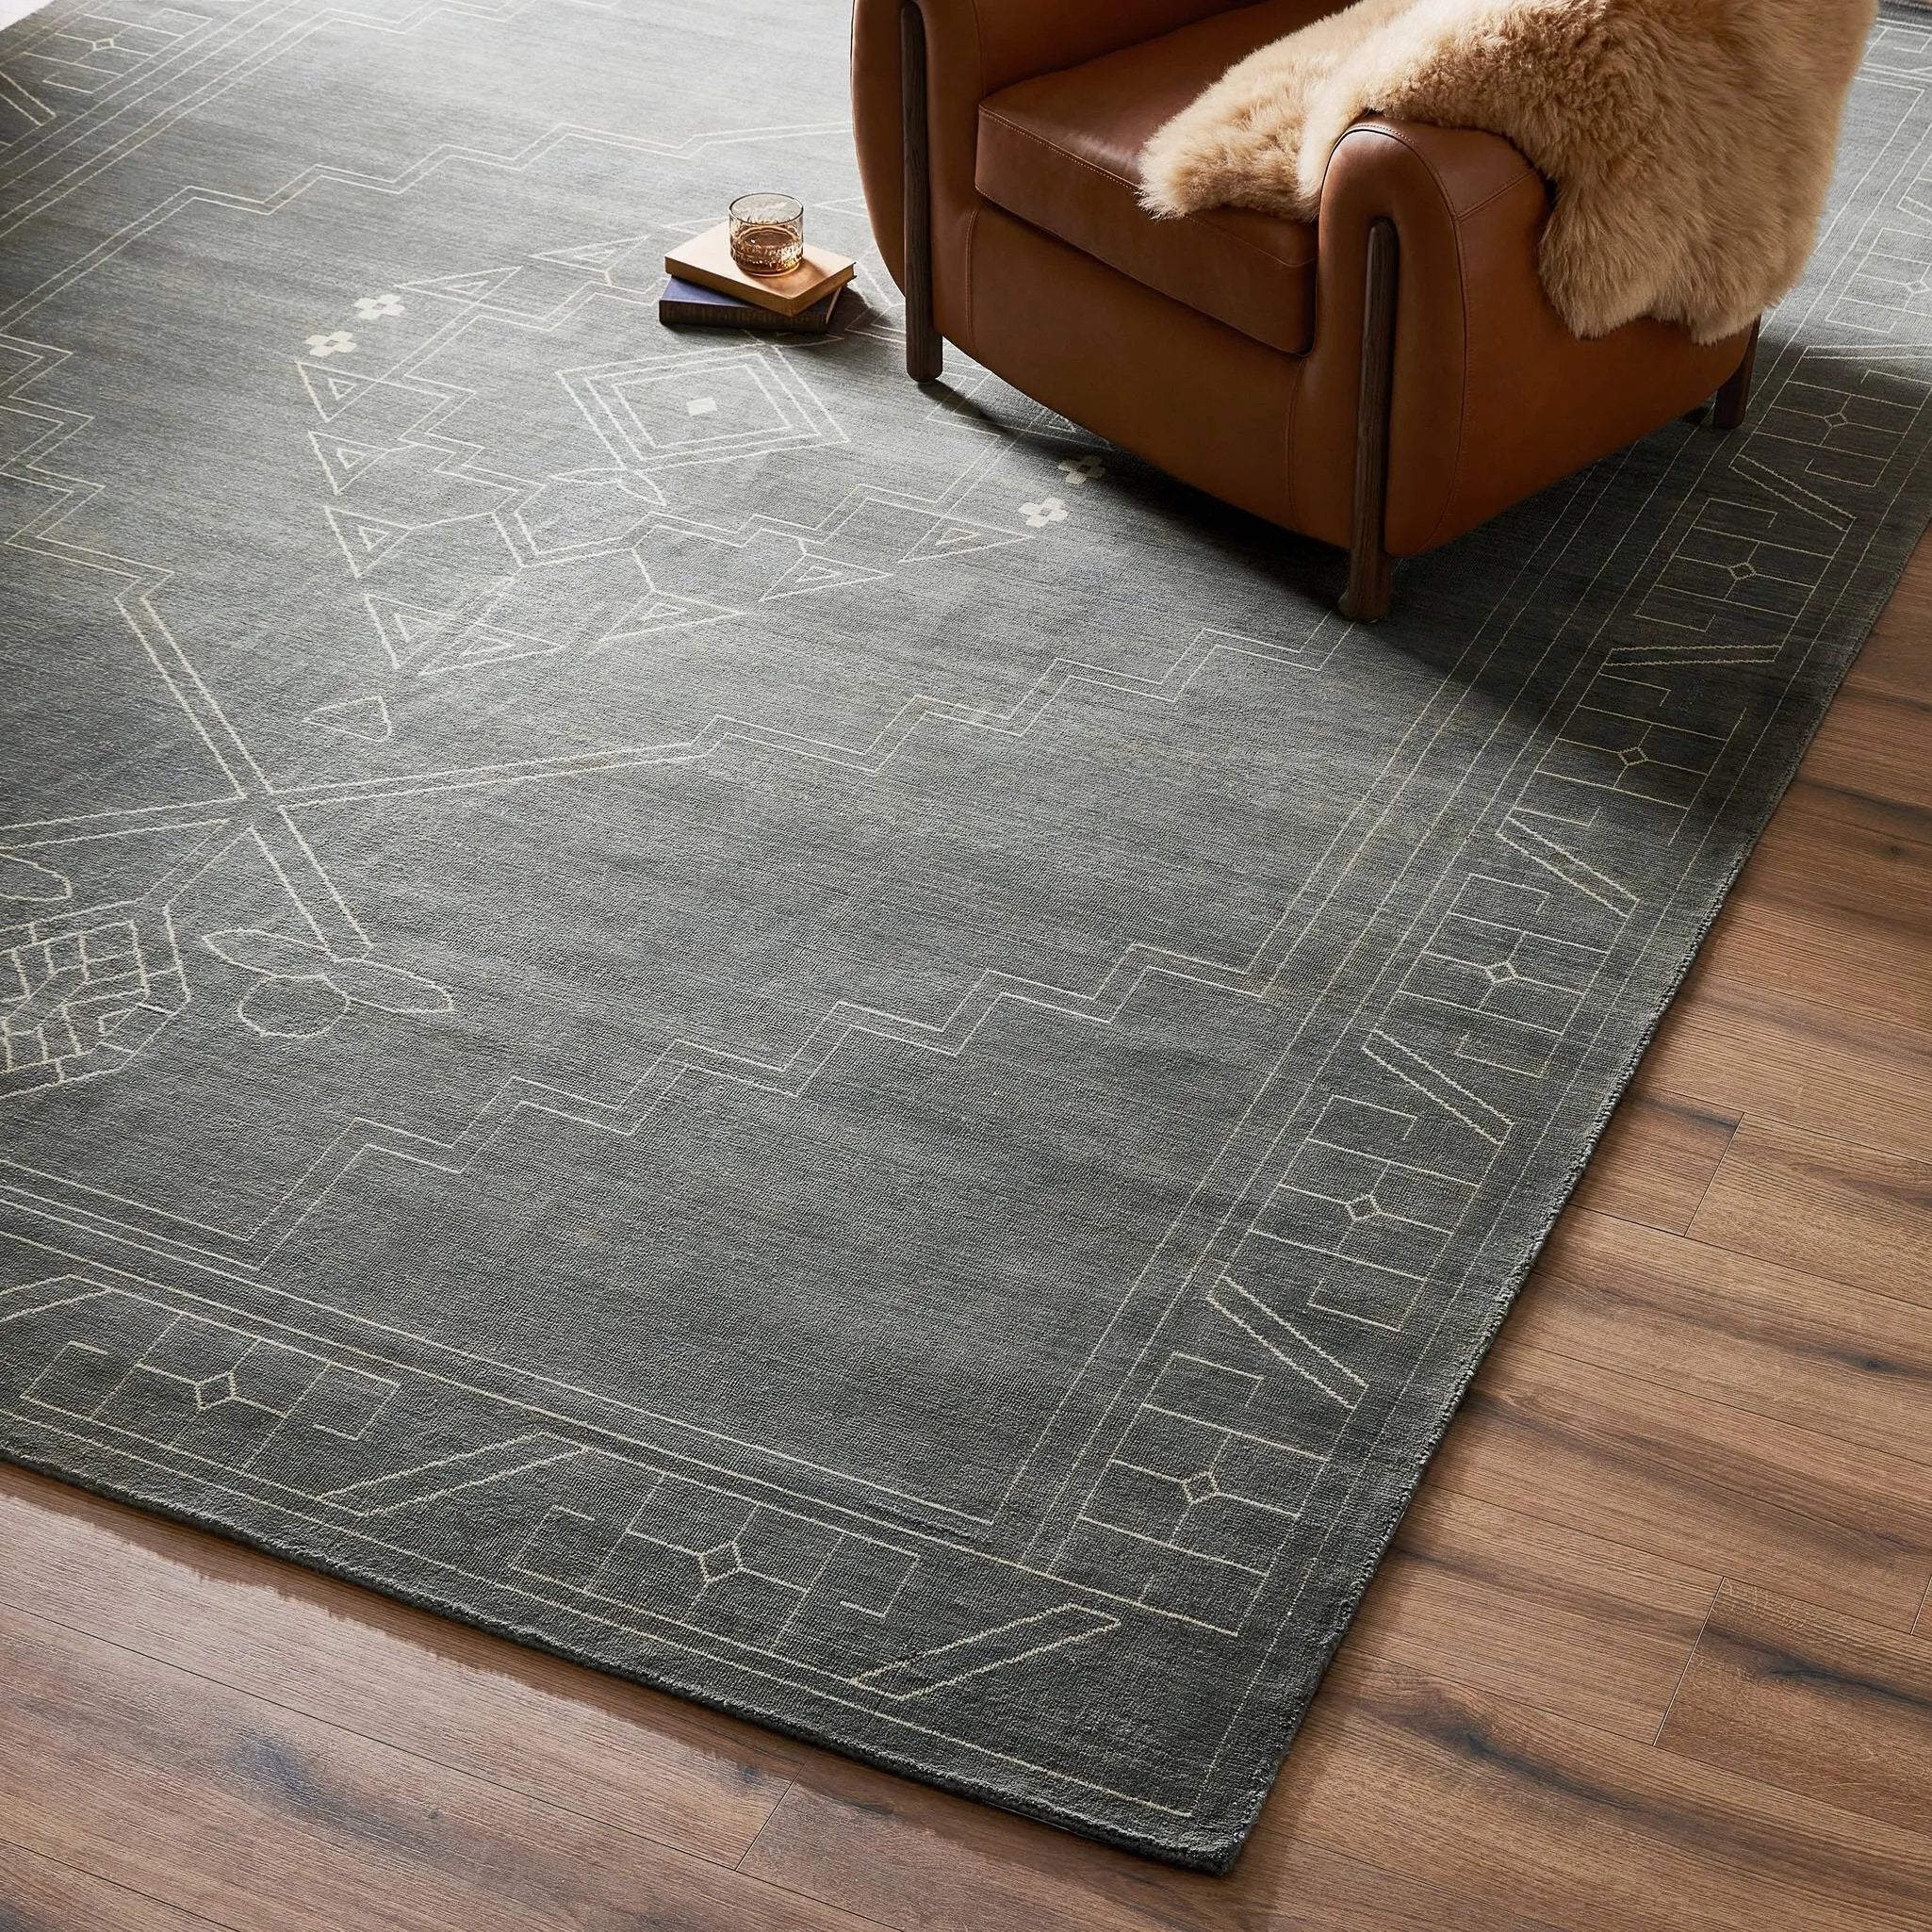 A subtle Turkish-inspired pattern adorns this wool-blend rug. The pattern and ground are purposefully similar in color for a unique take on a neutral.Overall Dimensions108.00"w x 144.00"d x 0.50"hFull Details &amp; SpecificationsTear SheetCleaning Code : X (vacuum Or Light Brush, No Cleaning Products Amethyst Home provides interior design, new home construction design consulting, vintage area rugs, and lighting in the Seattle metro area.